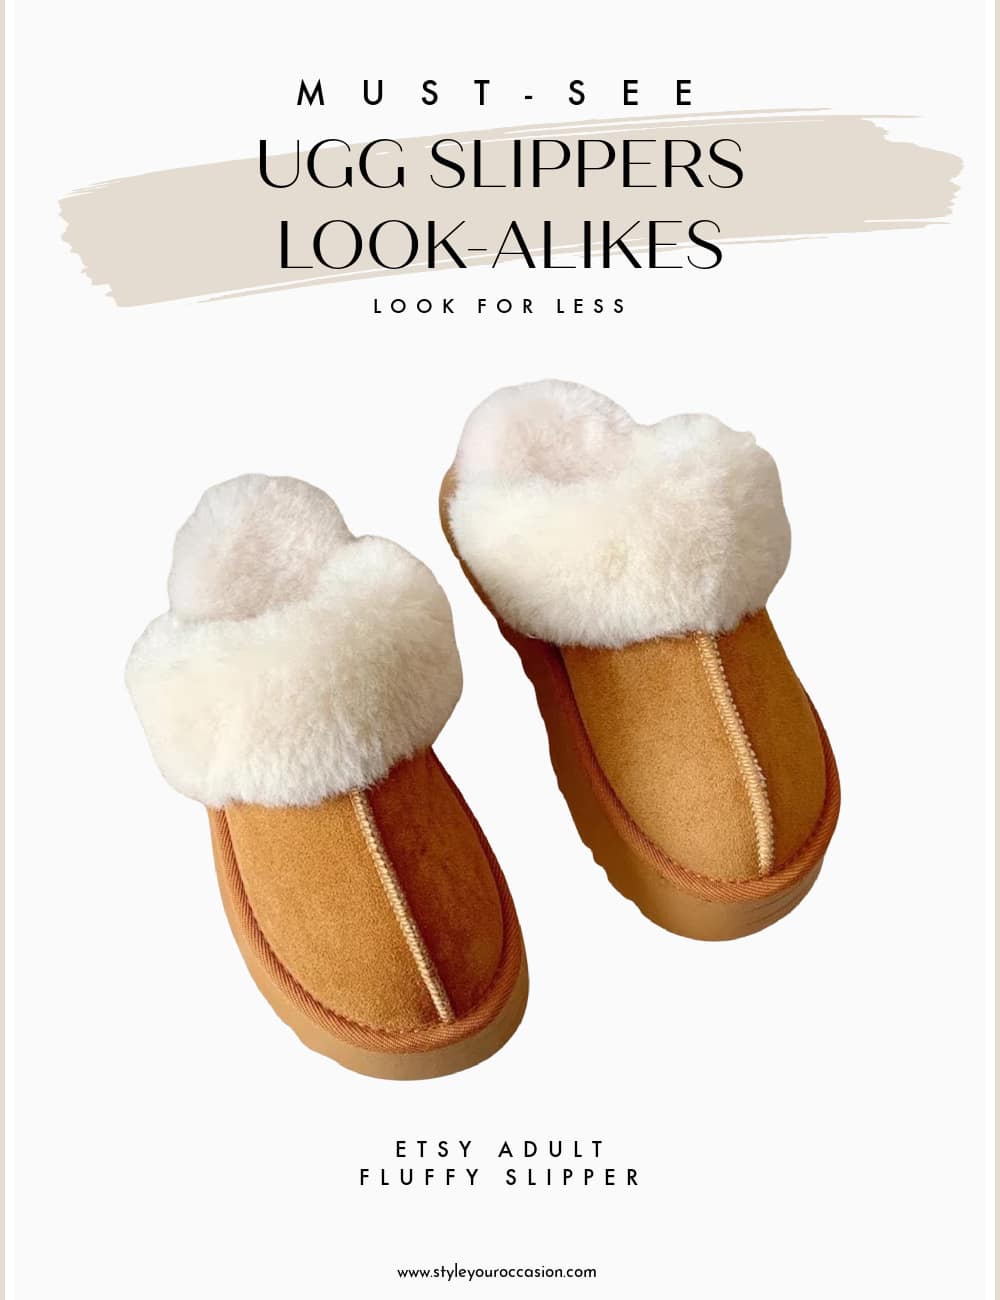 An image board of the adult fluffy slippers from Etsy as a dupe for Ugg slippers